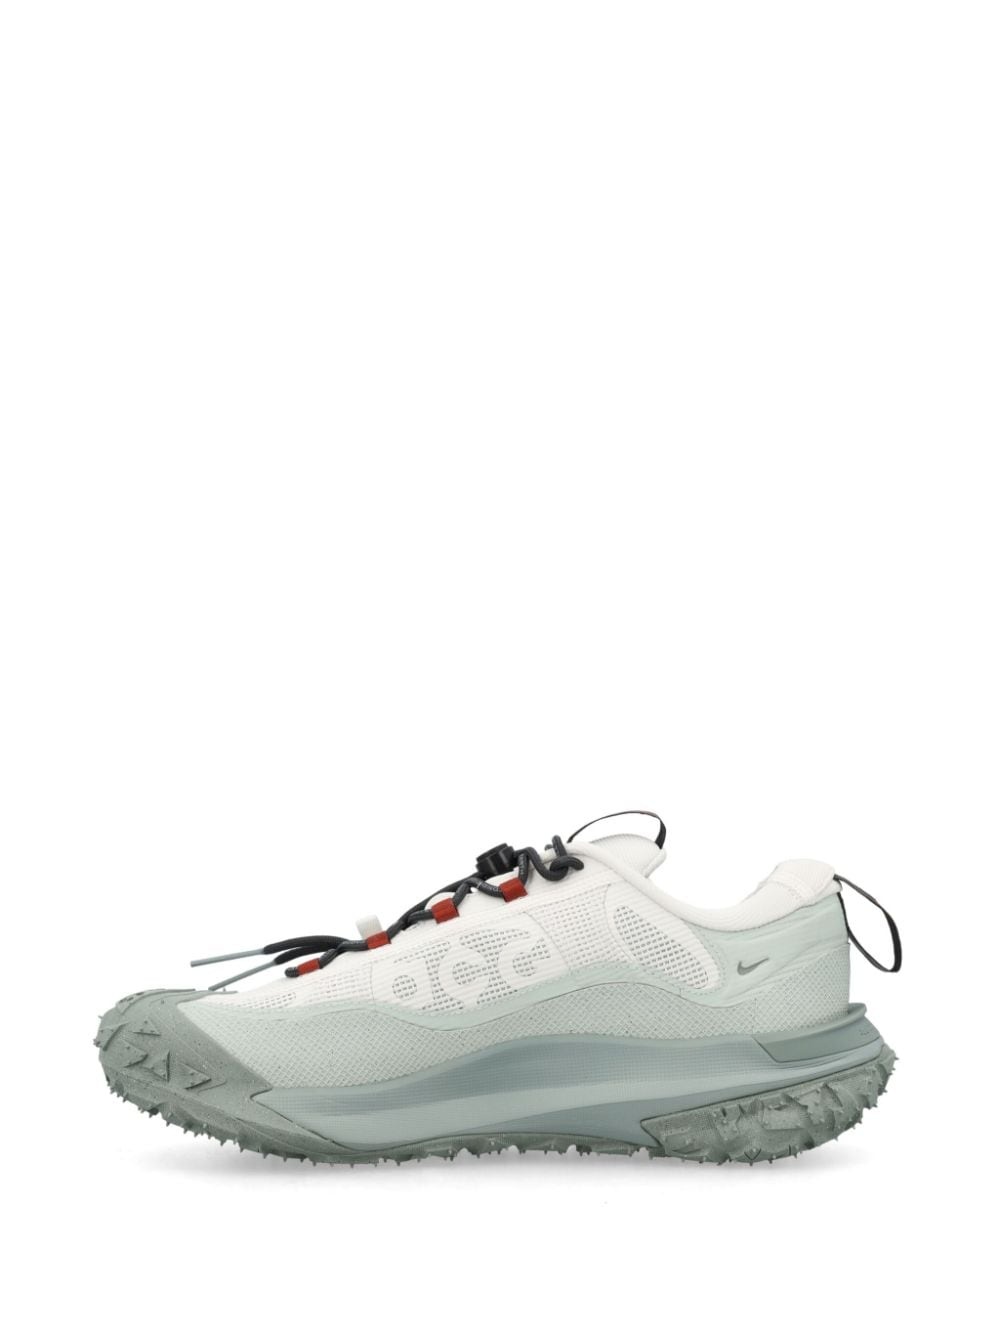 Nike ACG Mountain Fly 2 Low GORE-TEX sneakers - 4